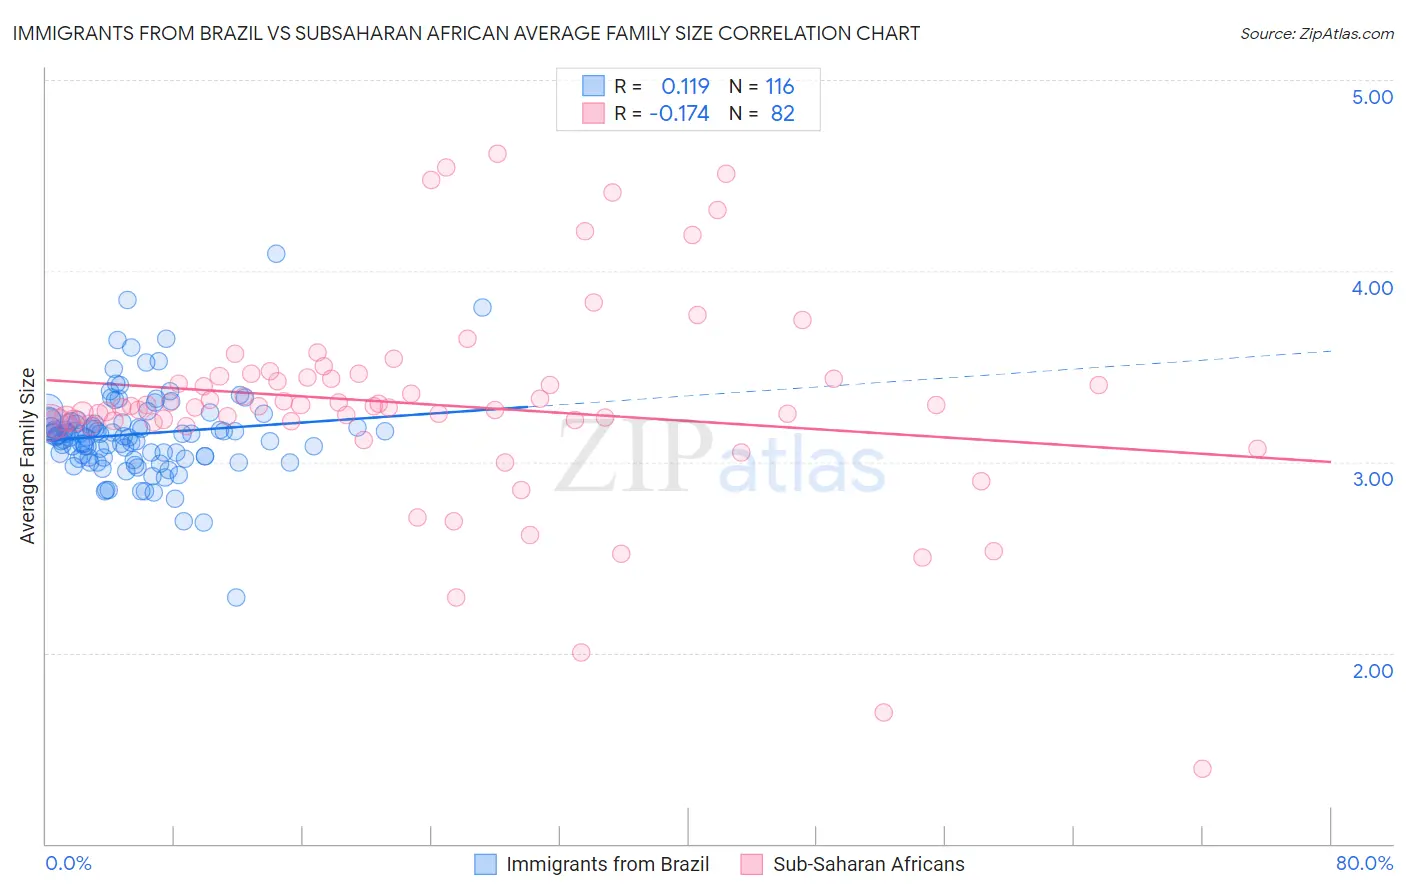 Immigrants from Brazil vs Subsaharan African Average Family Size